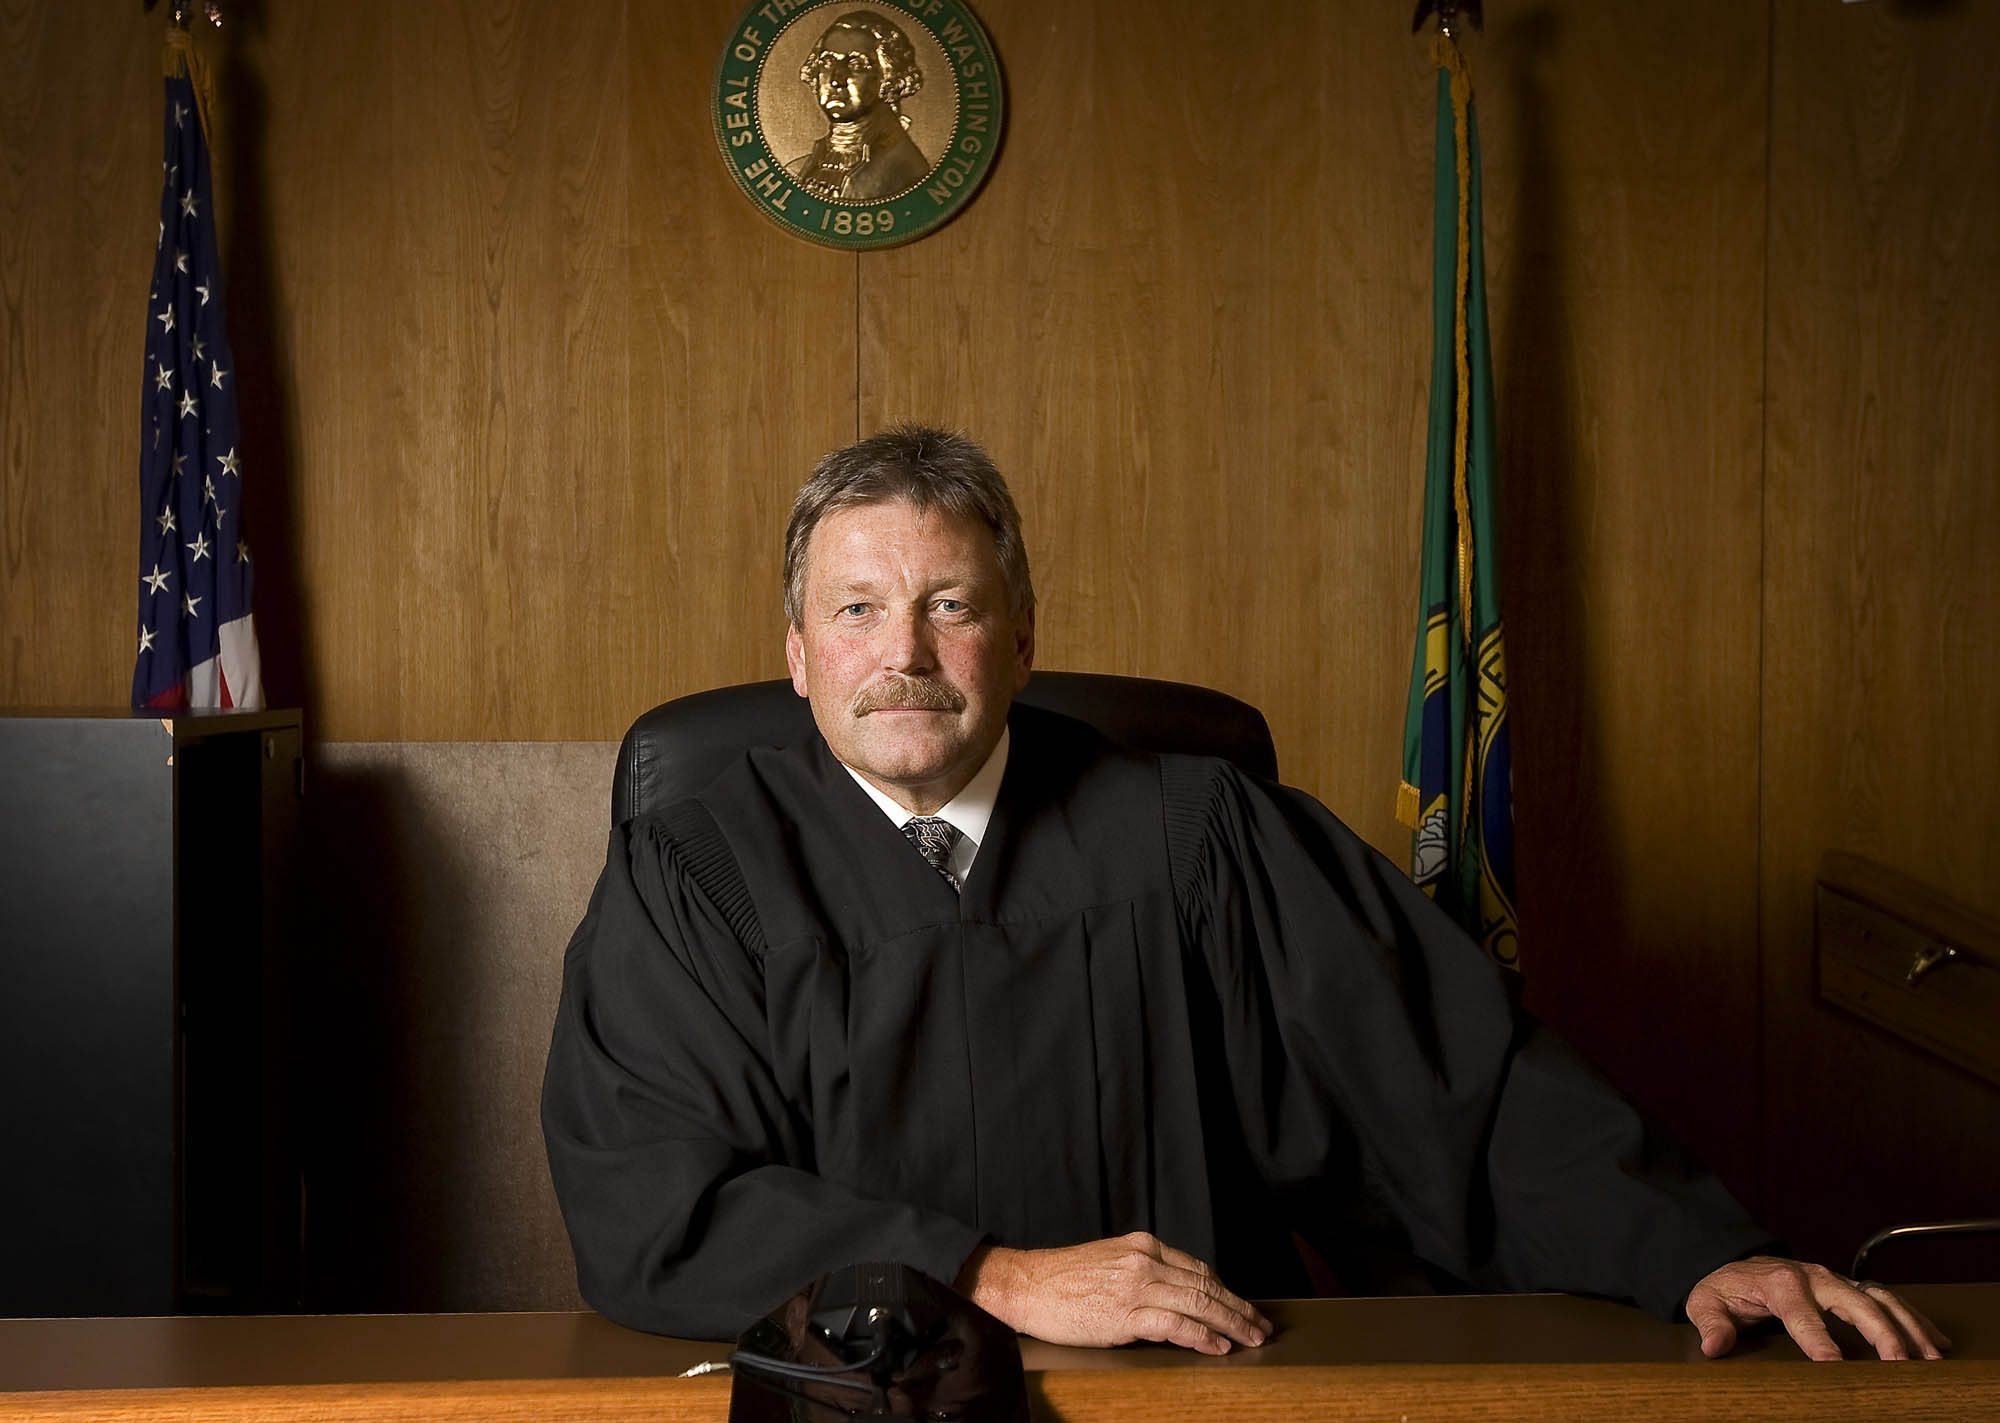 Clark County Superior Court Commissioner Dan Stahnke was appointed to the Superior Court bench.